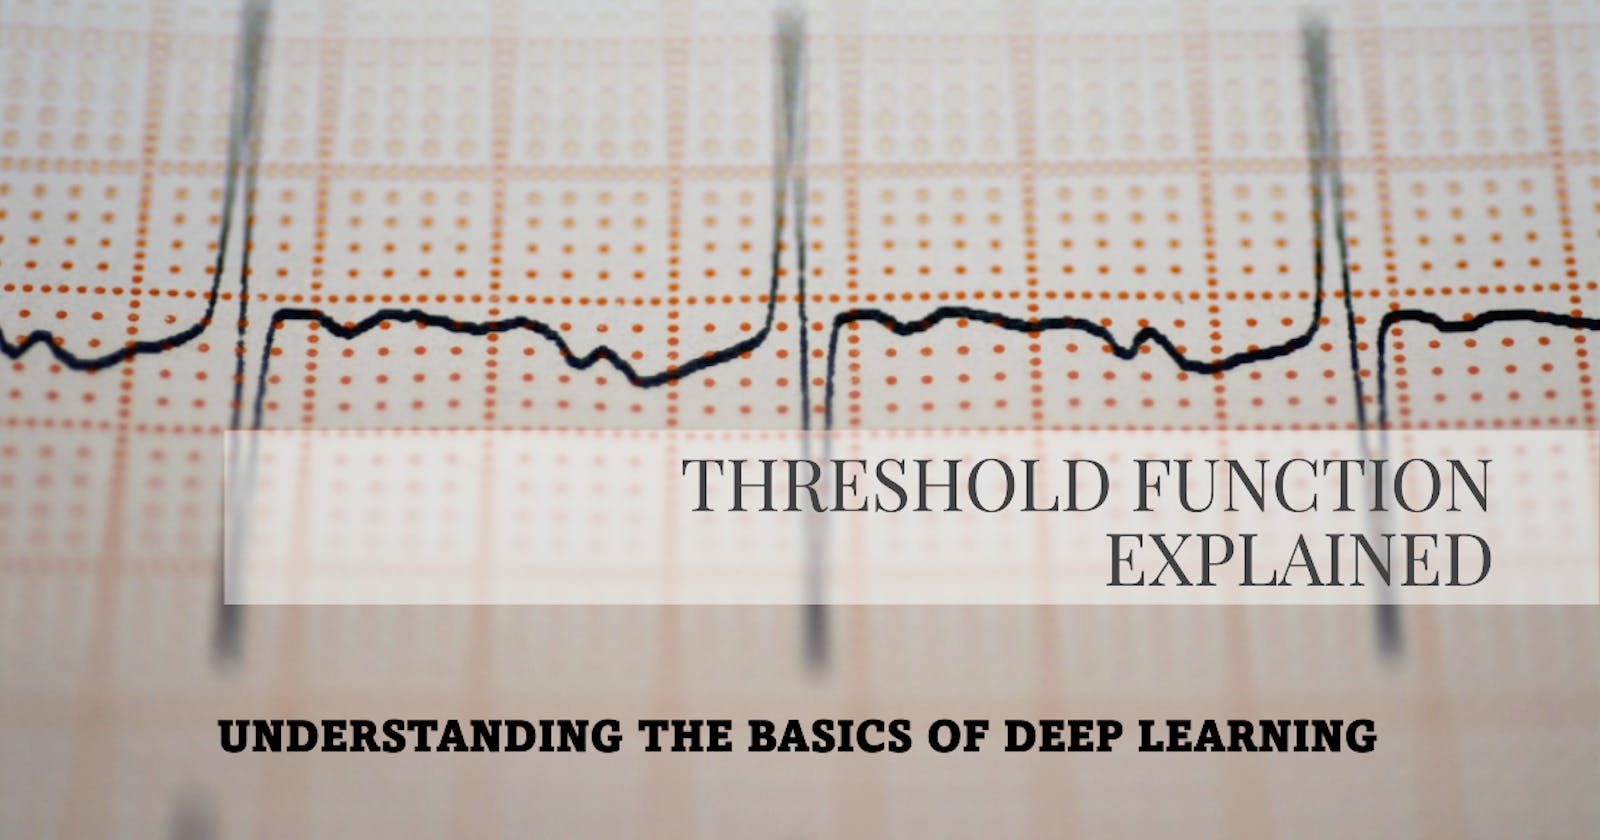 Detailed explanation of the threshold function